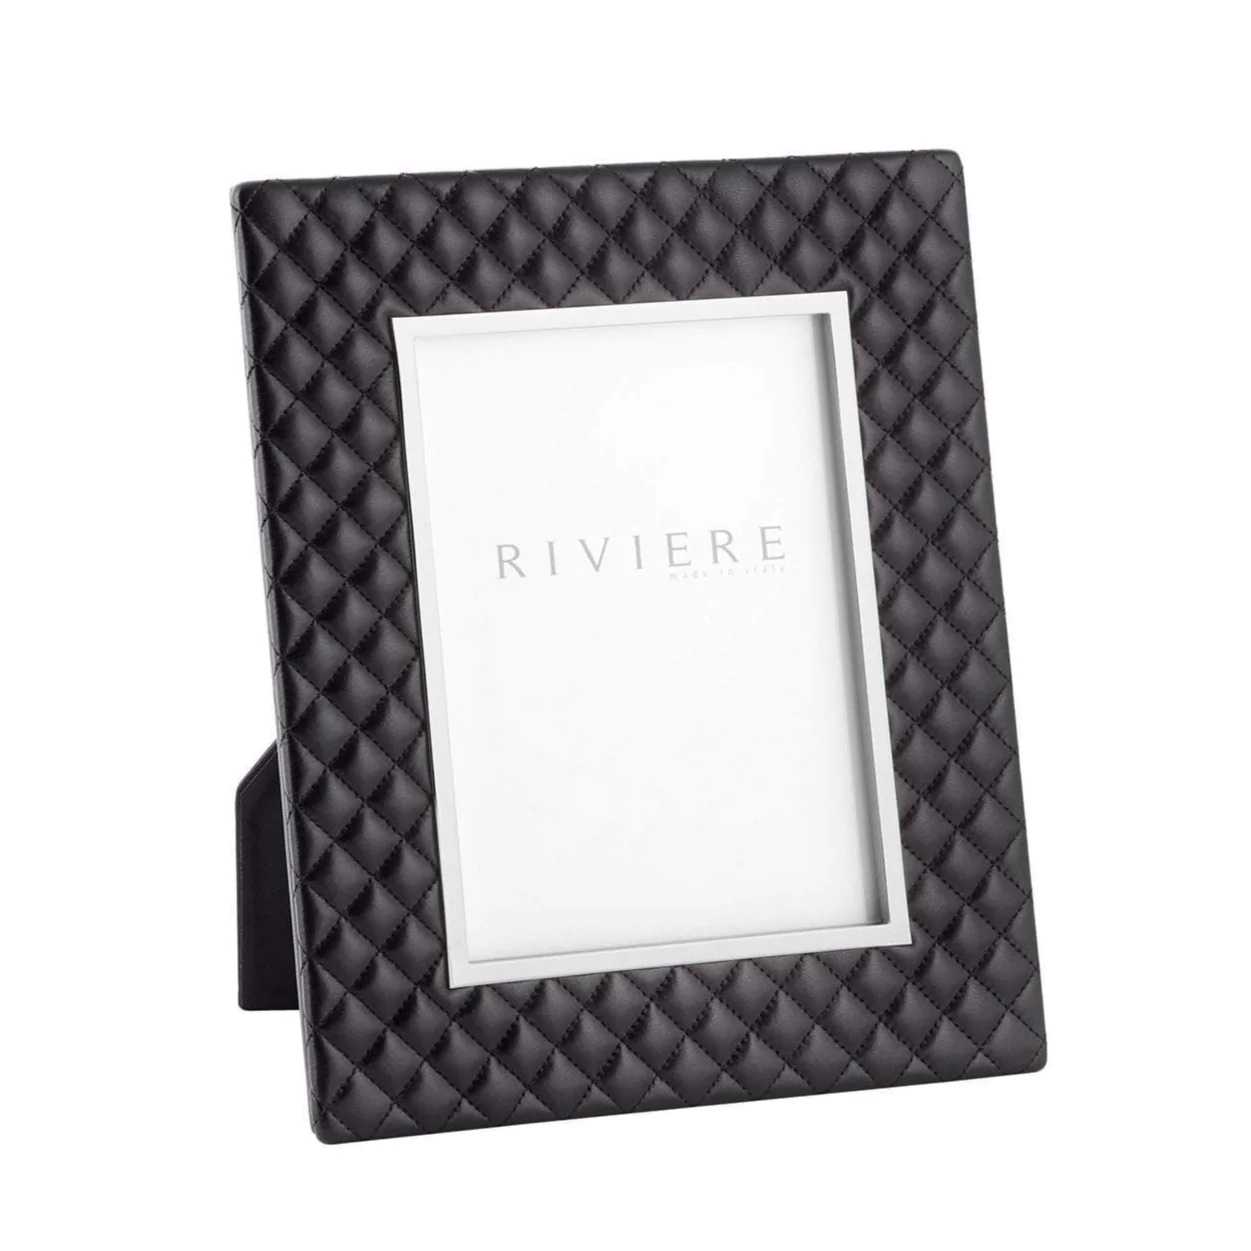 Quilted Leather & Chrome Photo Frame Black Leather Photo 10x15cm-1